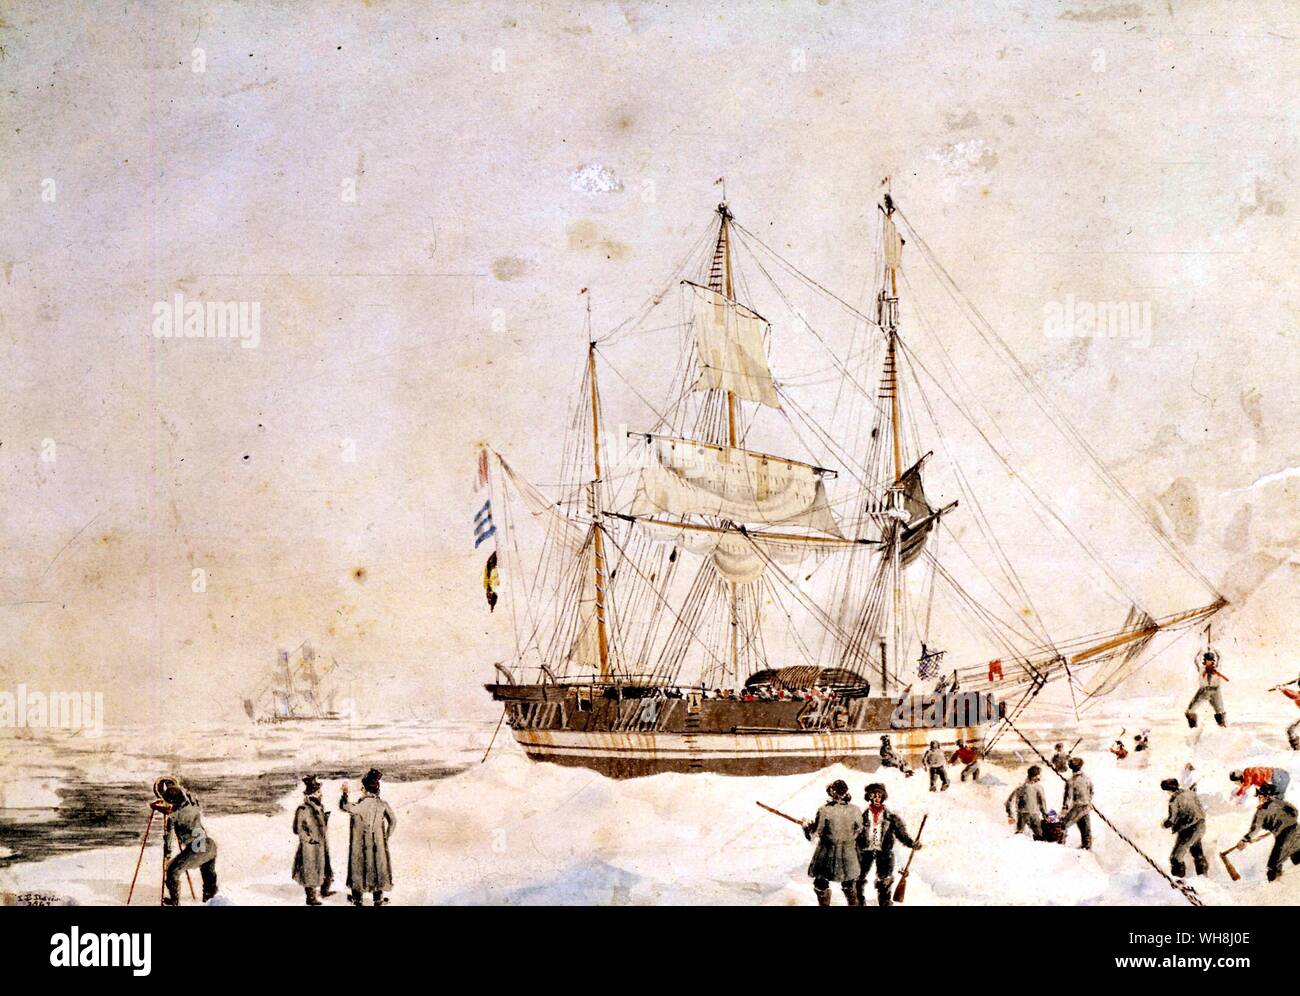 Detail of the Resolution beating through the ice, by John Webber, (1752-1793). Antarctica: The Last Continent by Ian Cameron, page 38.. The Resolution was responsible for some remarkable feats and was to prove one of the significant historical ships. She was the first ship to cross the Antarctic Circle (17 January 1773) and crossed twice more on the voyage. As a consequence the Resolution was instrumental in proving Dalrymple's Terra Australis Incognita (Southern Continent) to be a myth. On his third voyage, Captain James Cook crossed the Arctic Circle in the Resolution on 17th August 1778. Stock Photo